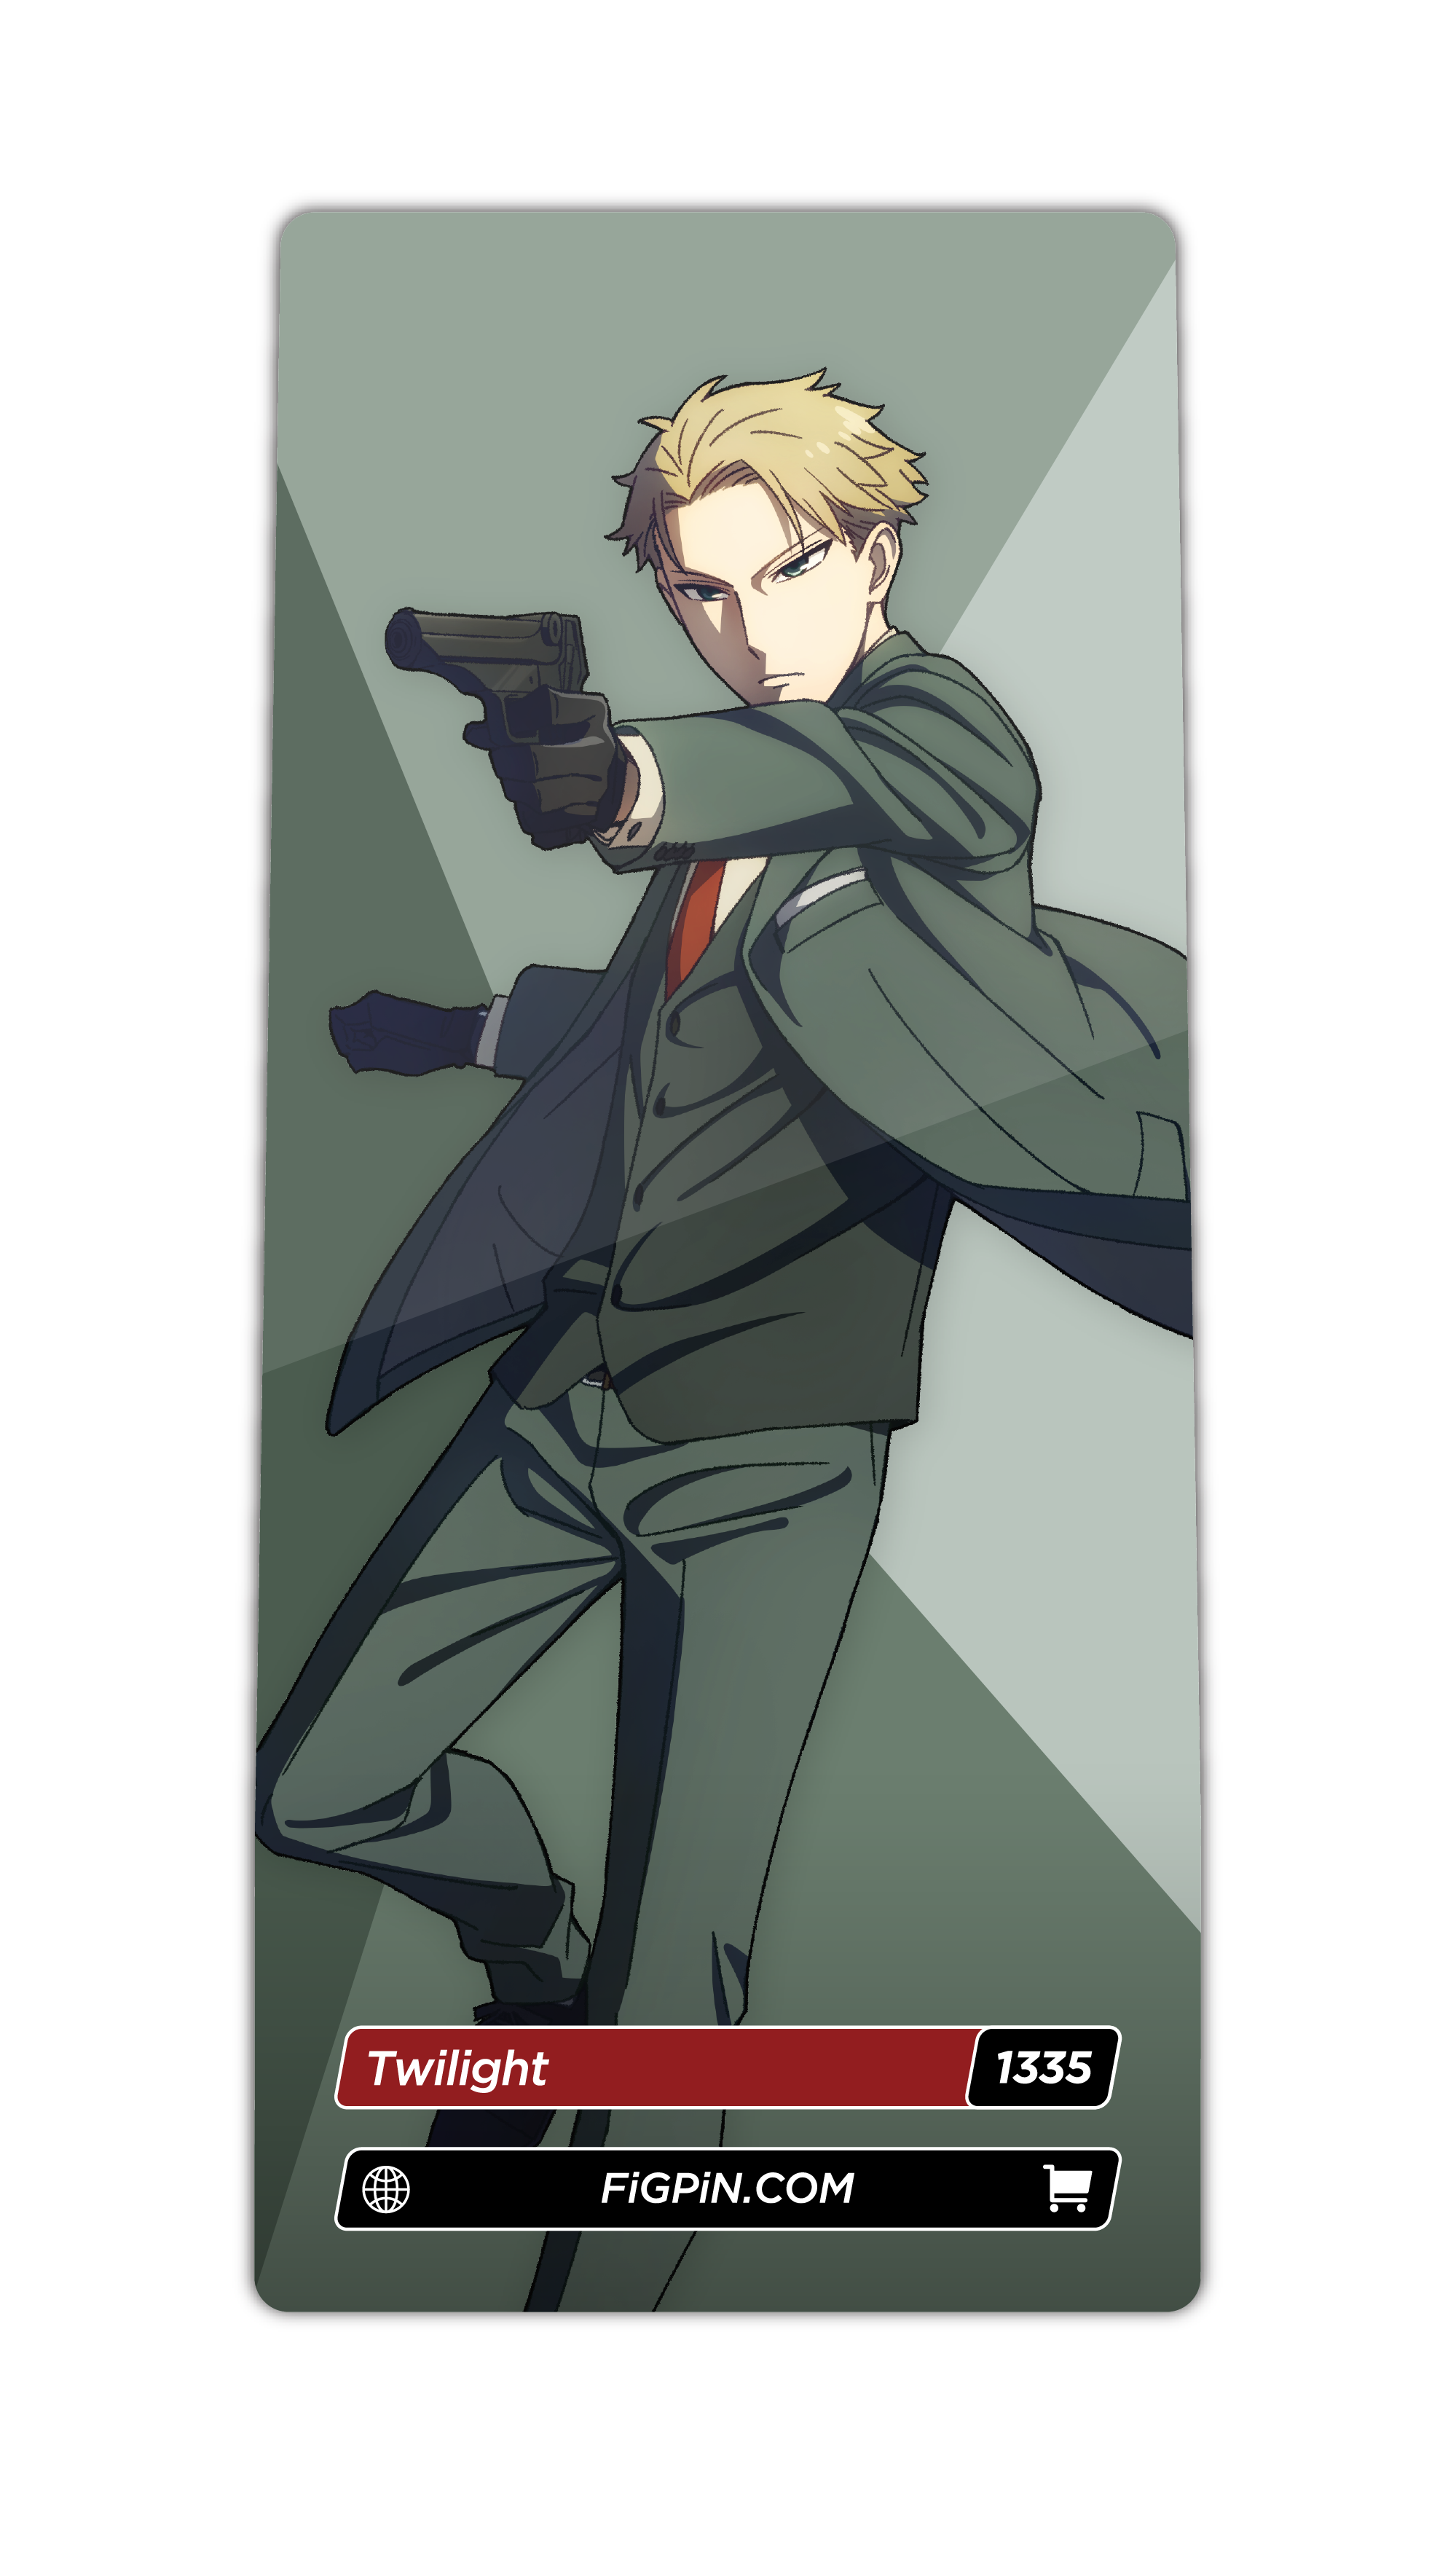 Character card of Spy x Family's Twilight with text “Twilight (1335)” and link to FiGPiN’s website